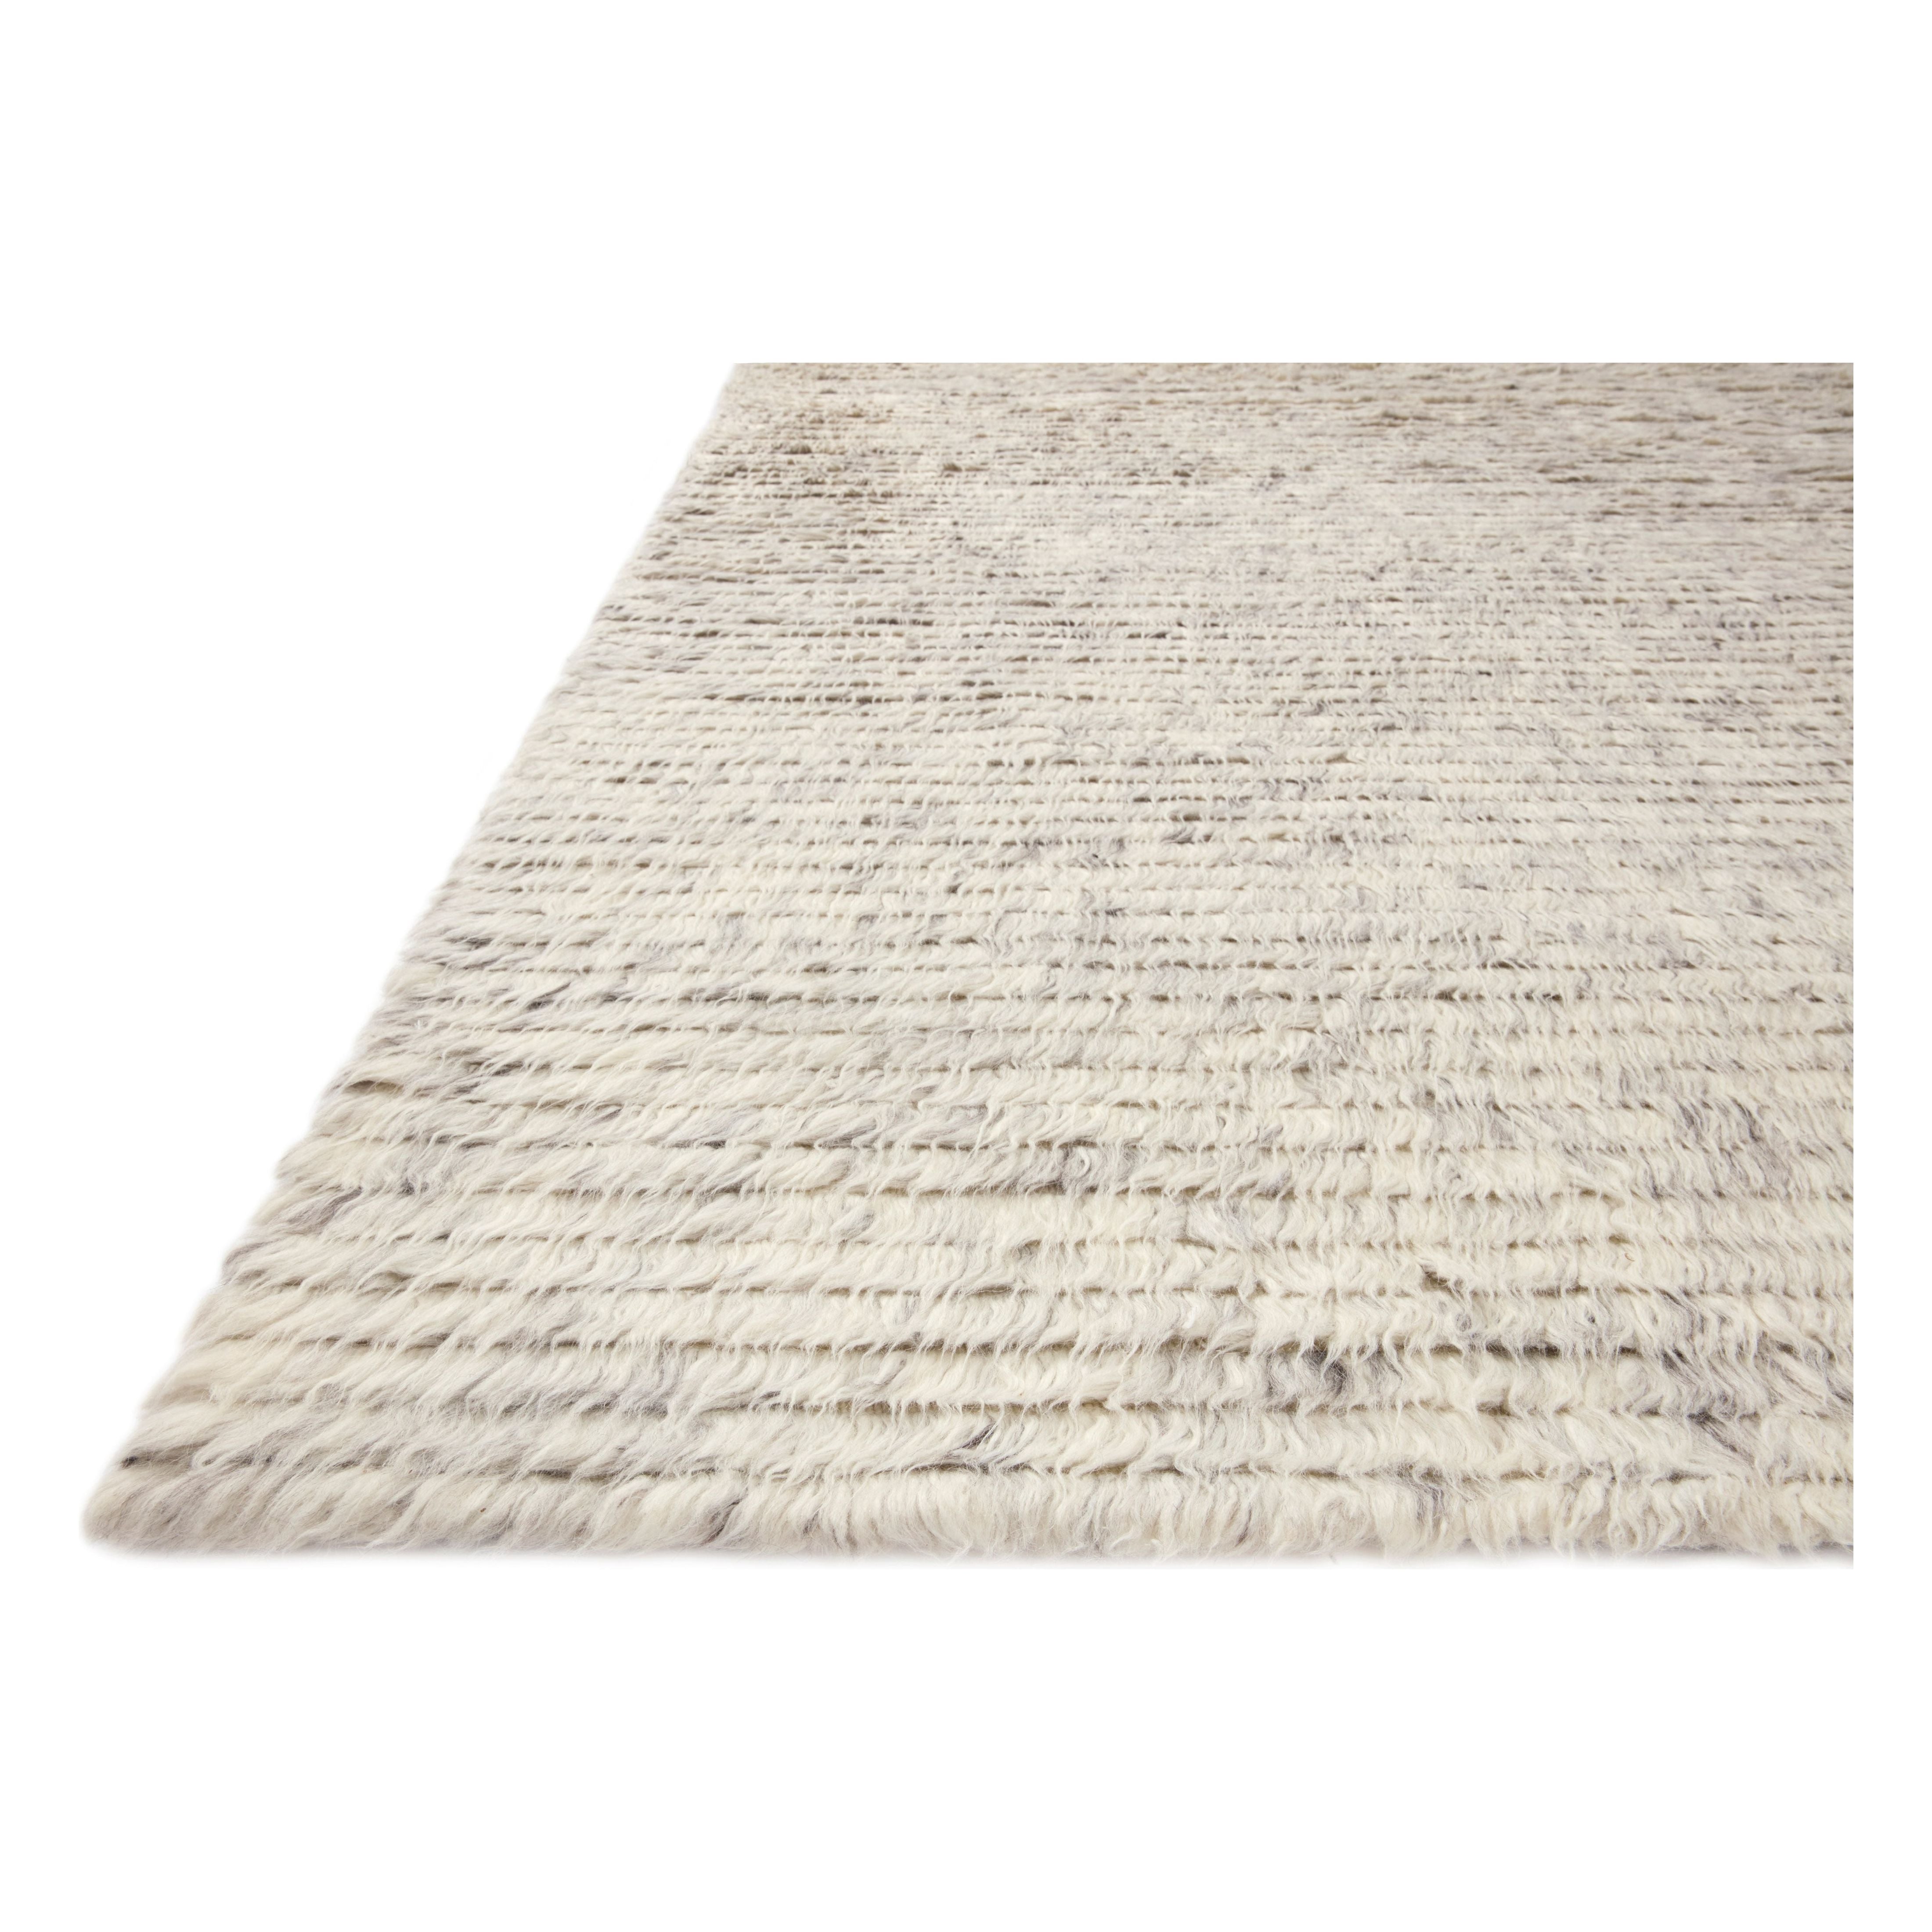 The Amber Lewis x Loloi Woodland Silver Rug has a lush, soft pile inspired by the tree-lined city of Woodland, California. A slightly ridged construction adds dimension and movement to this stylish, modern rug. Amethyst Home provides interior design services, furniture, rugs, and lighting in the Seattle metro area.